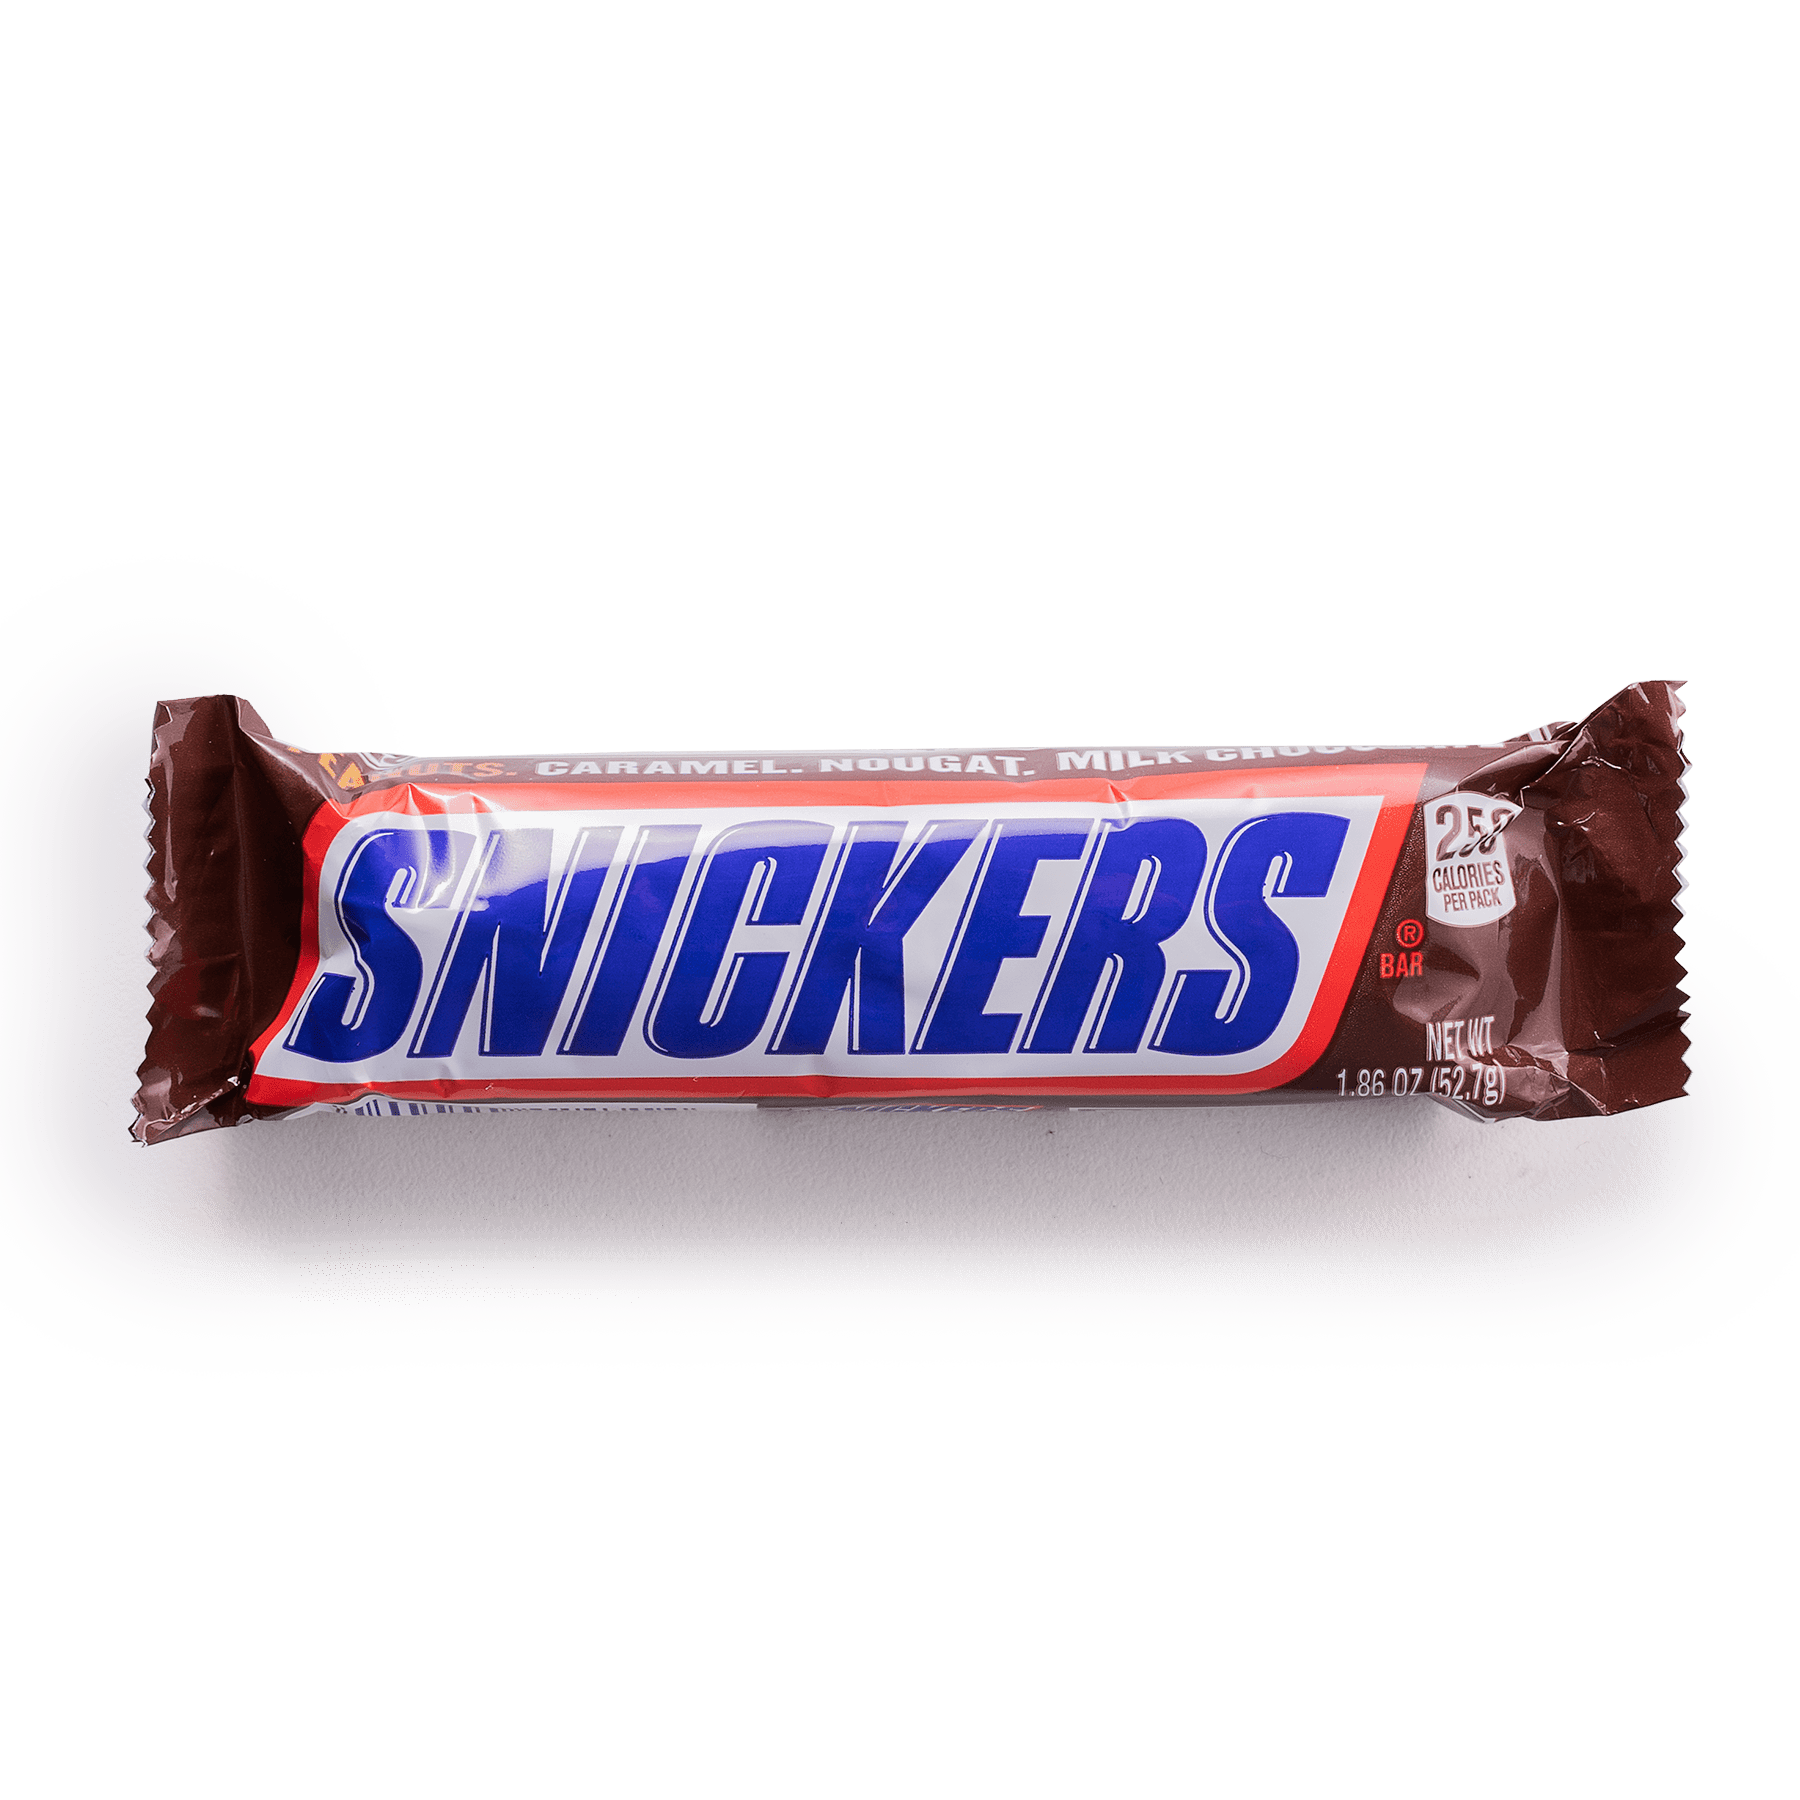 SNICKERS® Bar | 7-Eleven